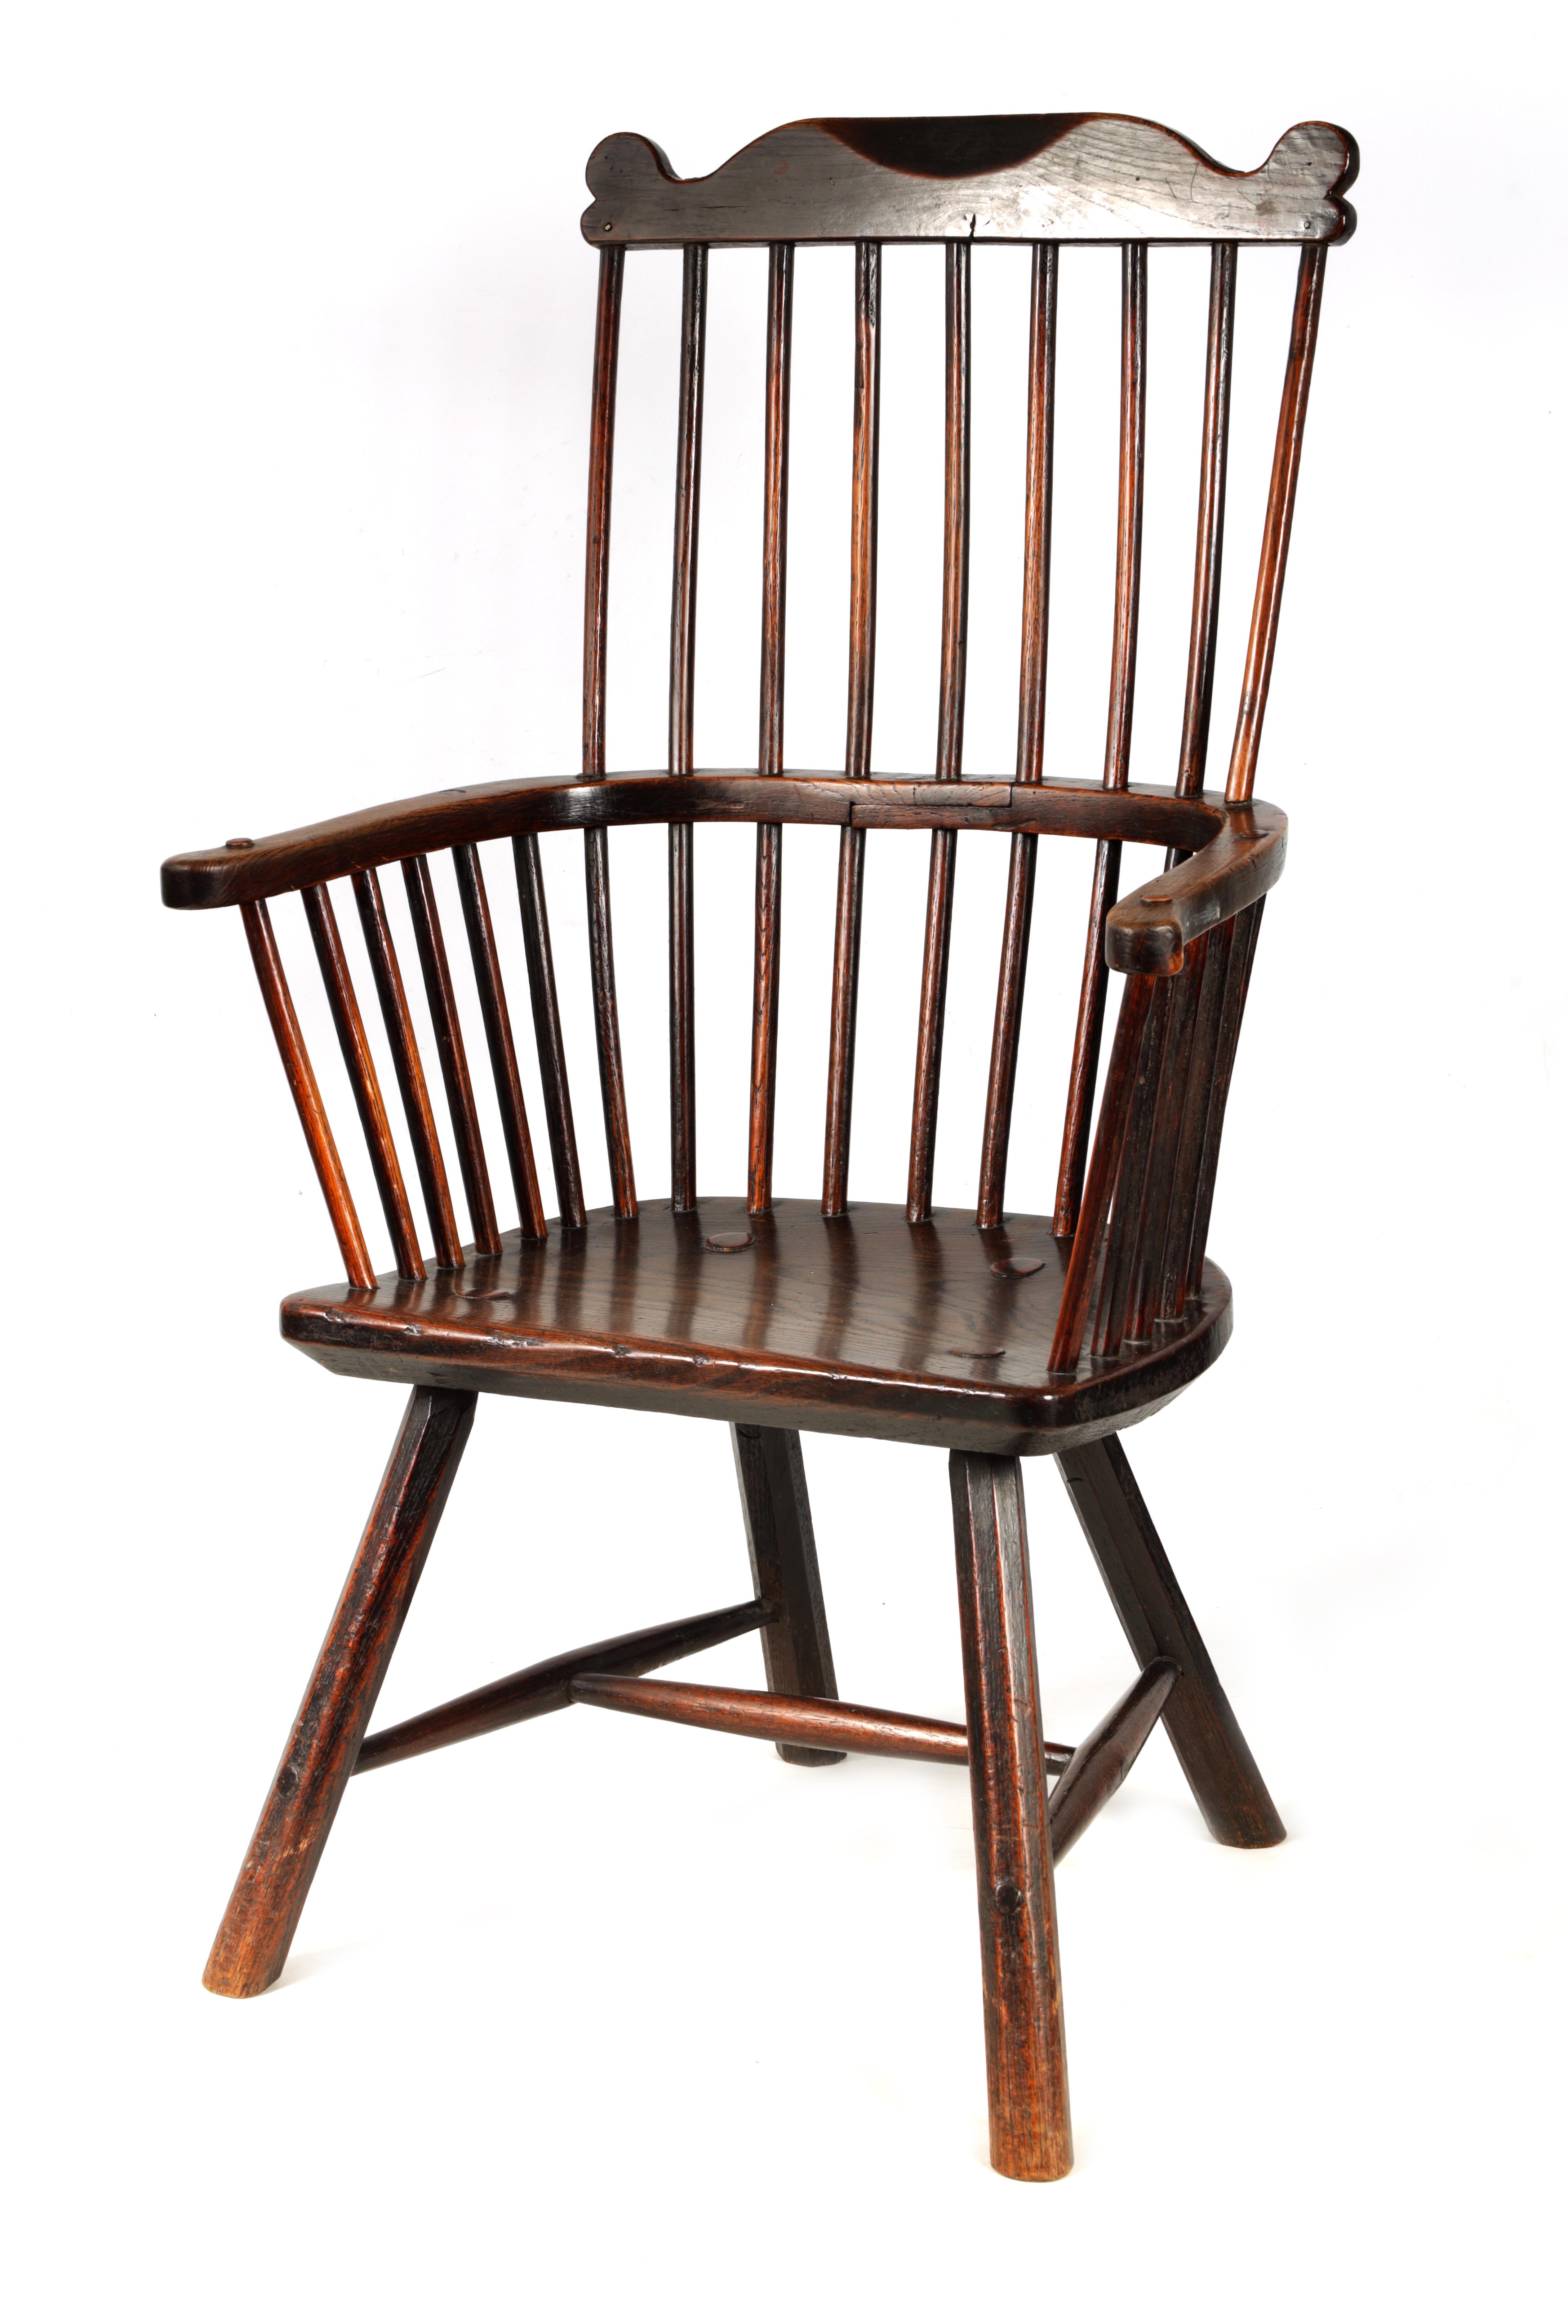 A GOOD 18TH CENTURY THAMES VALLEY OAK AND ELM WINDSOR CHAIR with shaped top rail and flared arms,